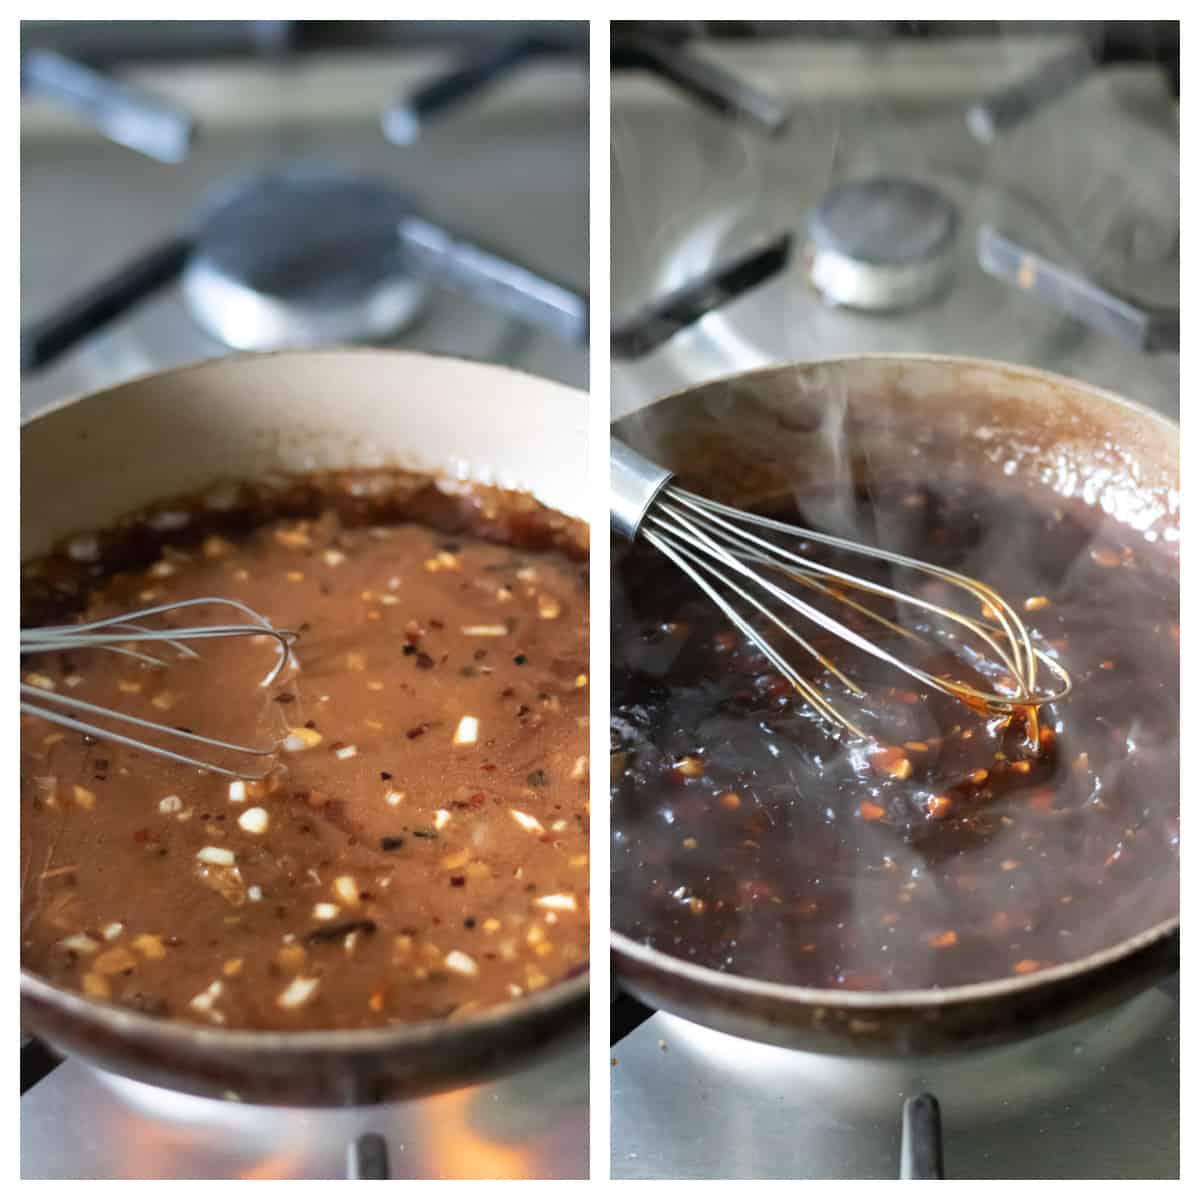 Stirring sweet chili sauce in a pan on the stove.